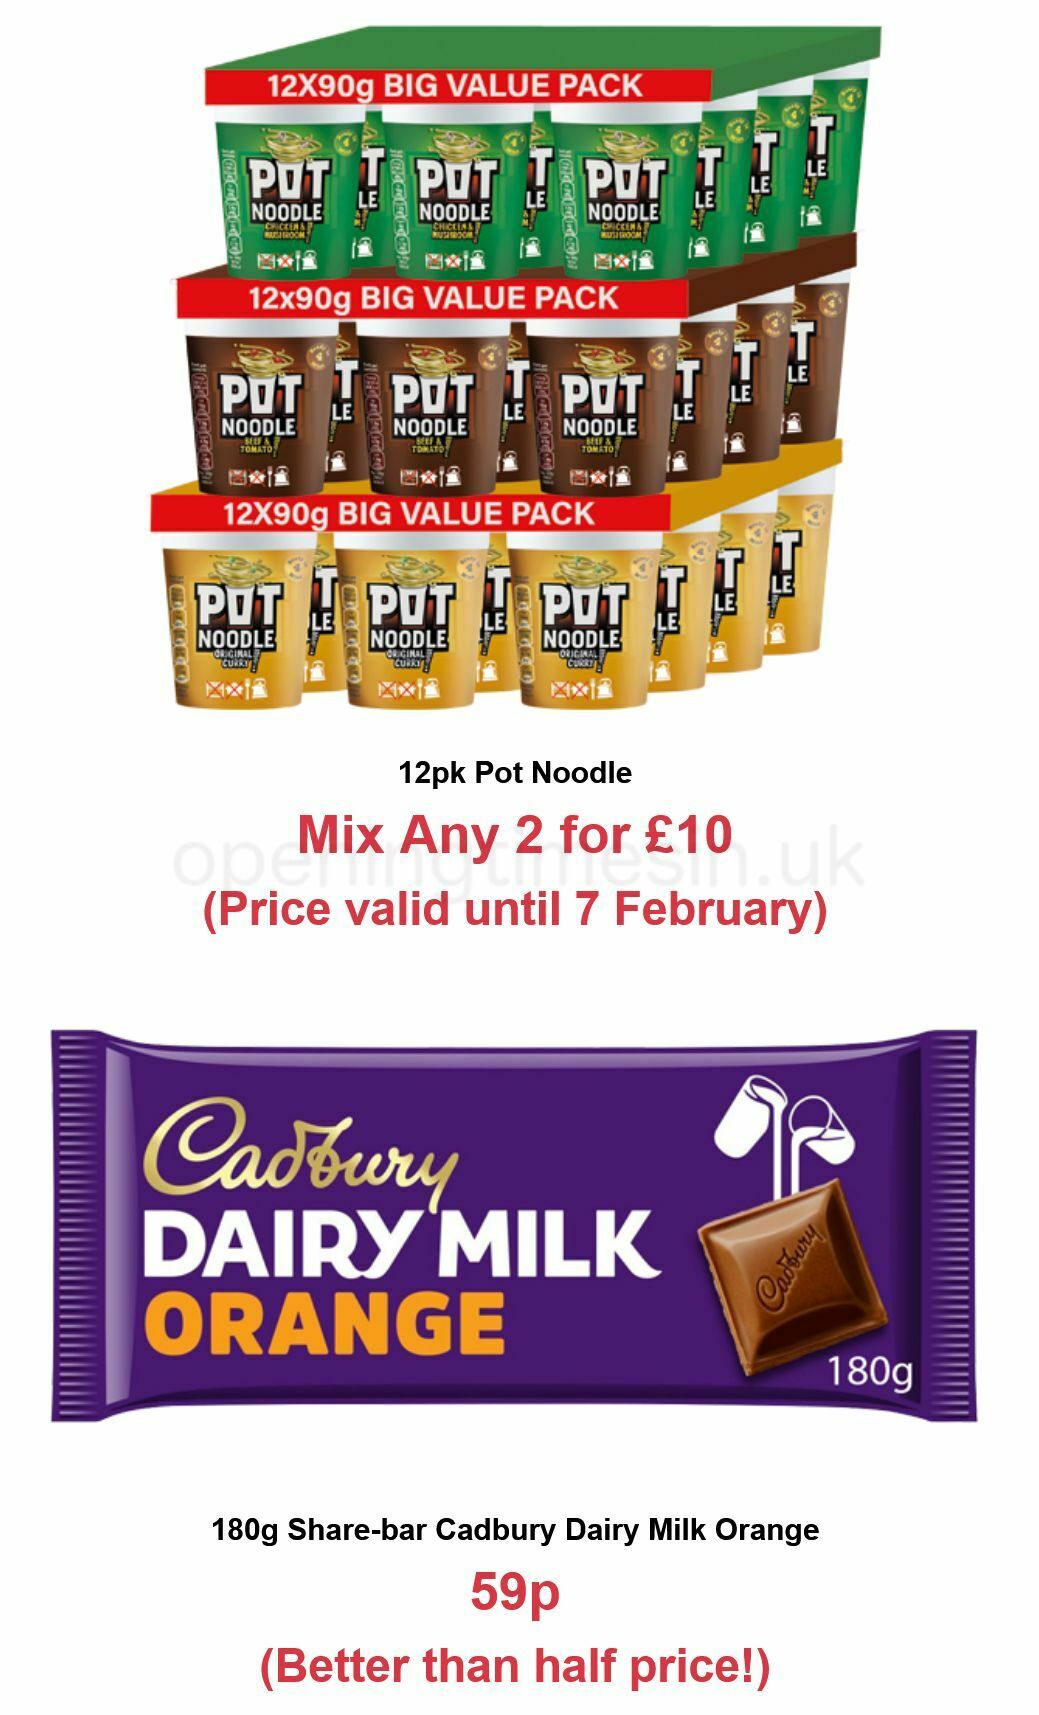 Farmfoods Offers from 1 February